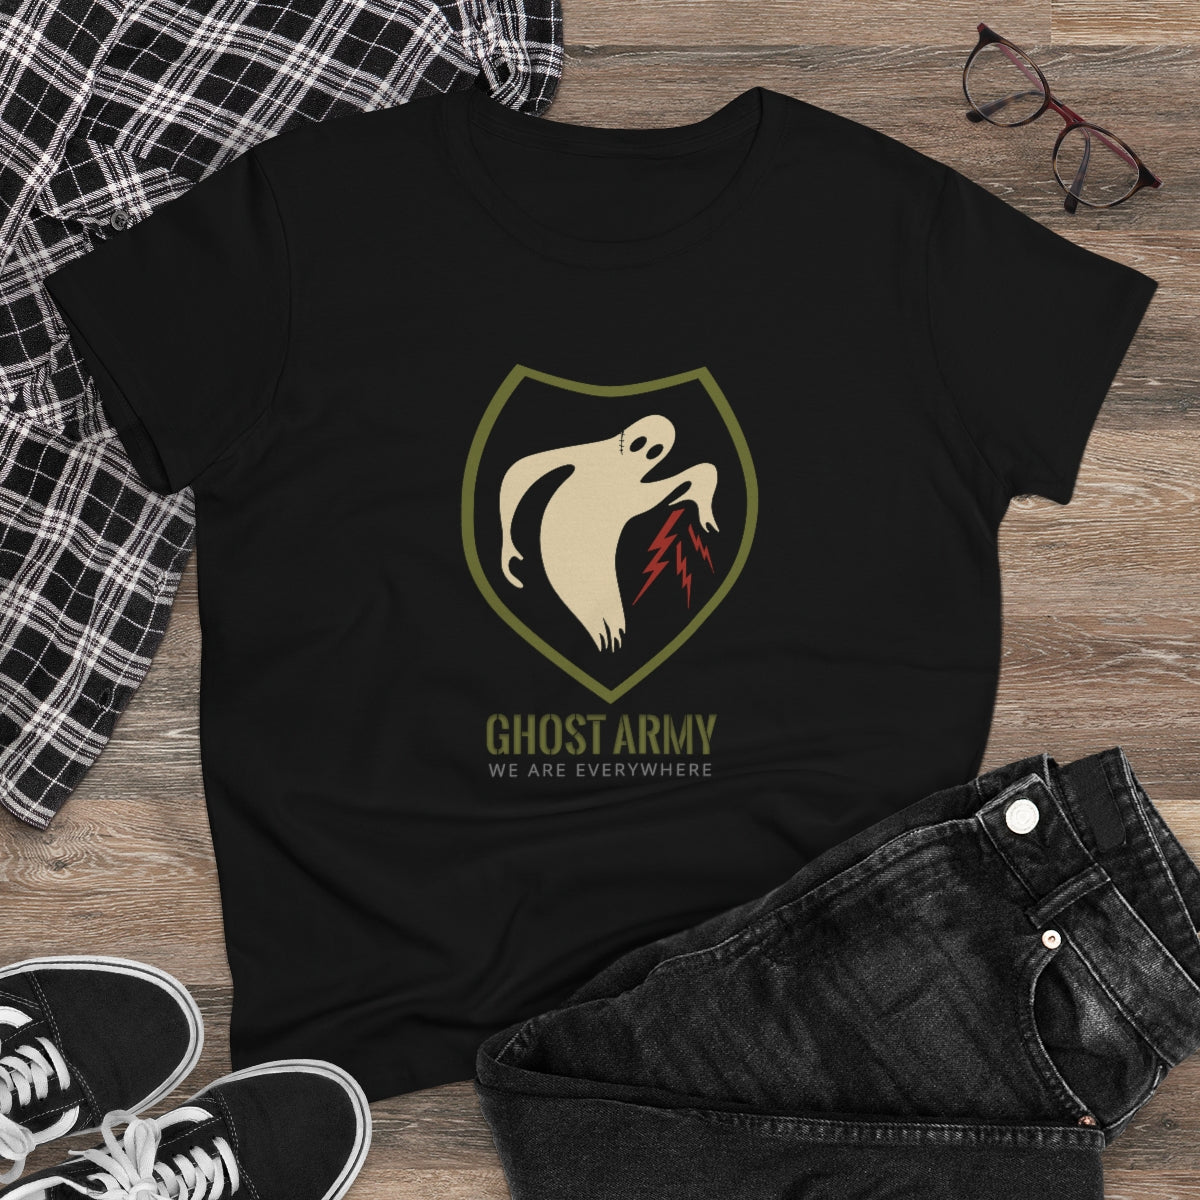 Ghost Army - We Are Everywhere | Women's Tee - Rise of The New Media